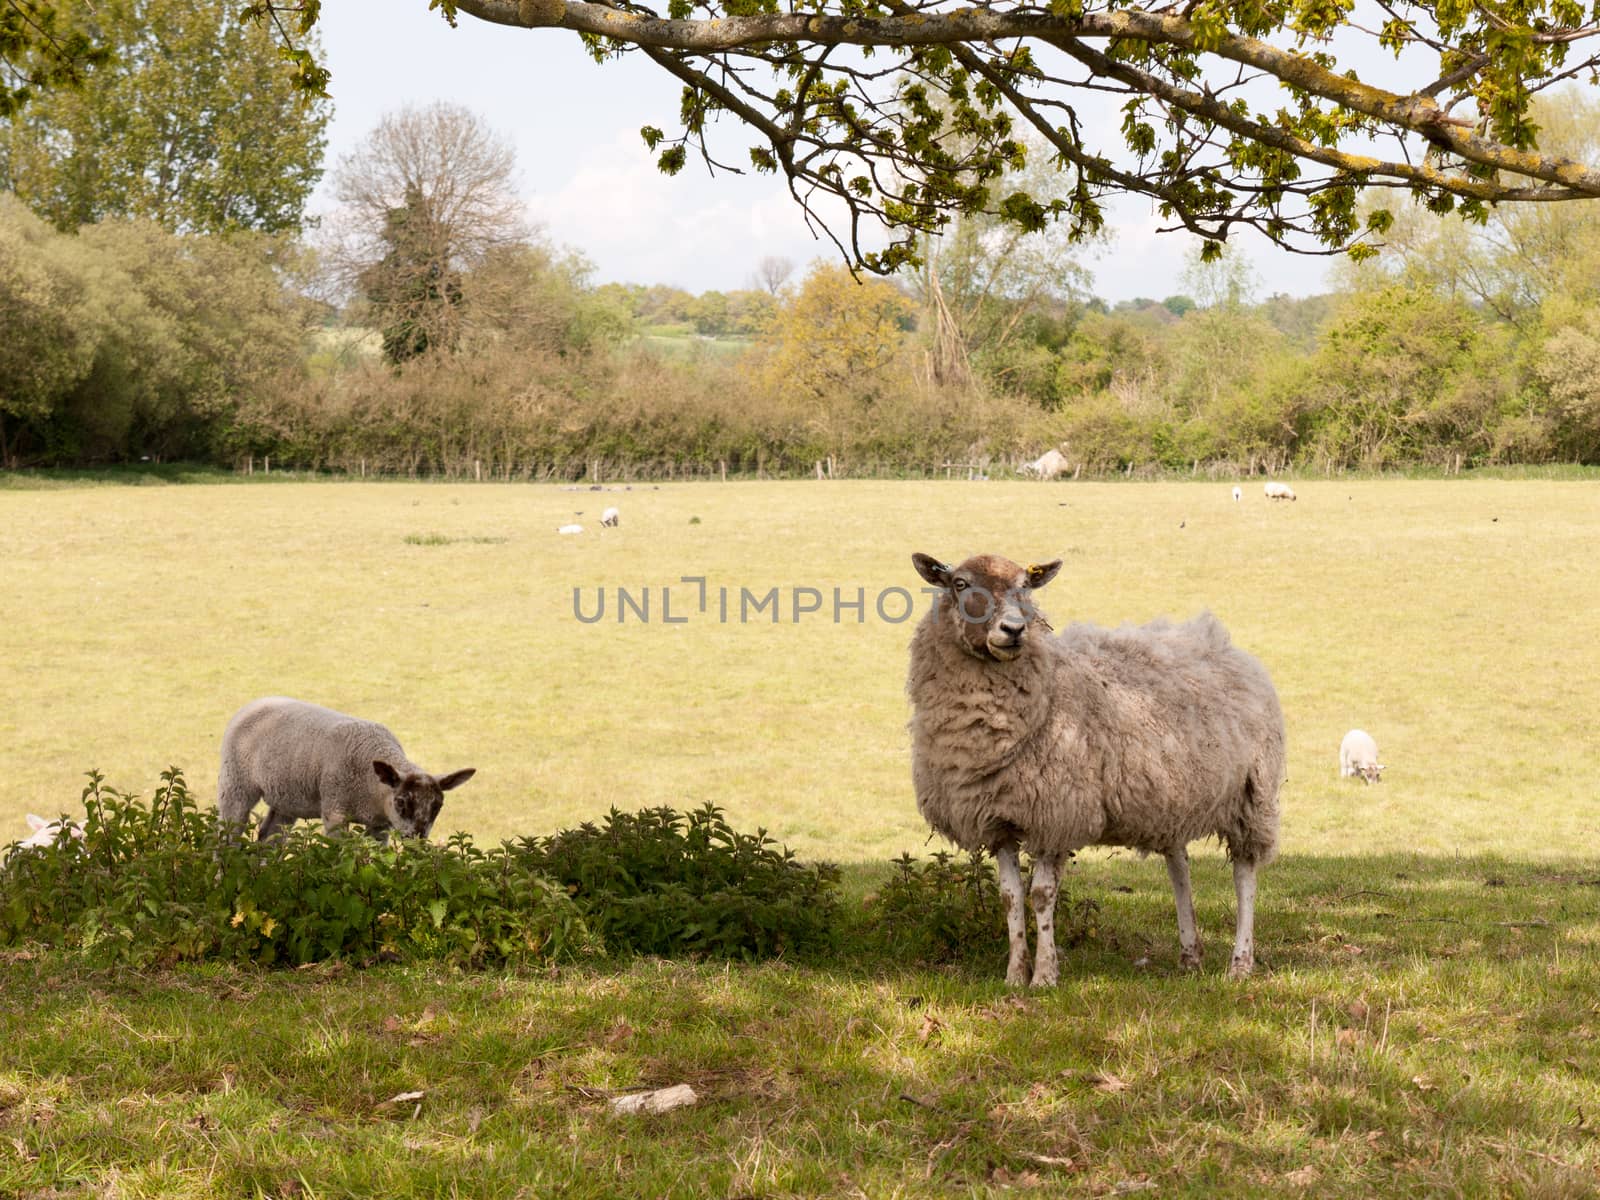 two sheep, mother and lamb, in a field under a tree looking cute by callumrc